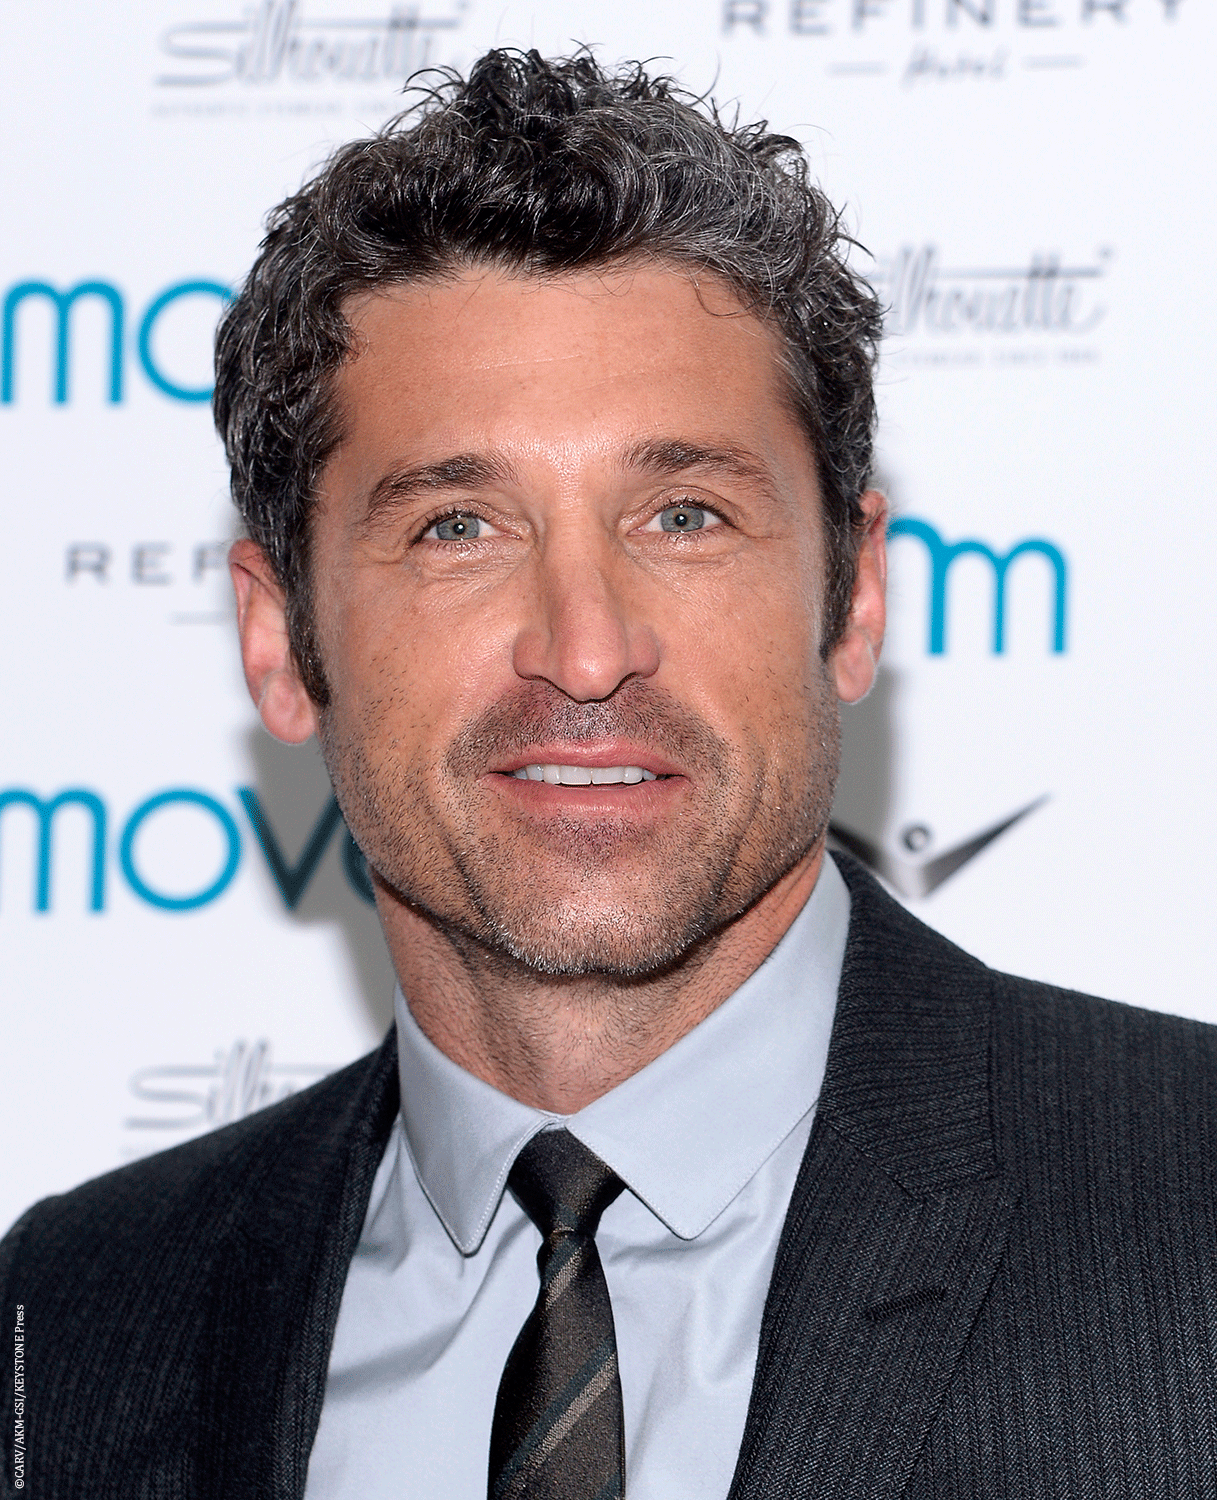 Patrick dempsey hairstyle